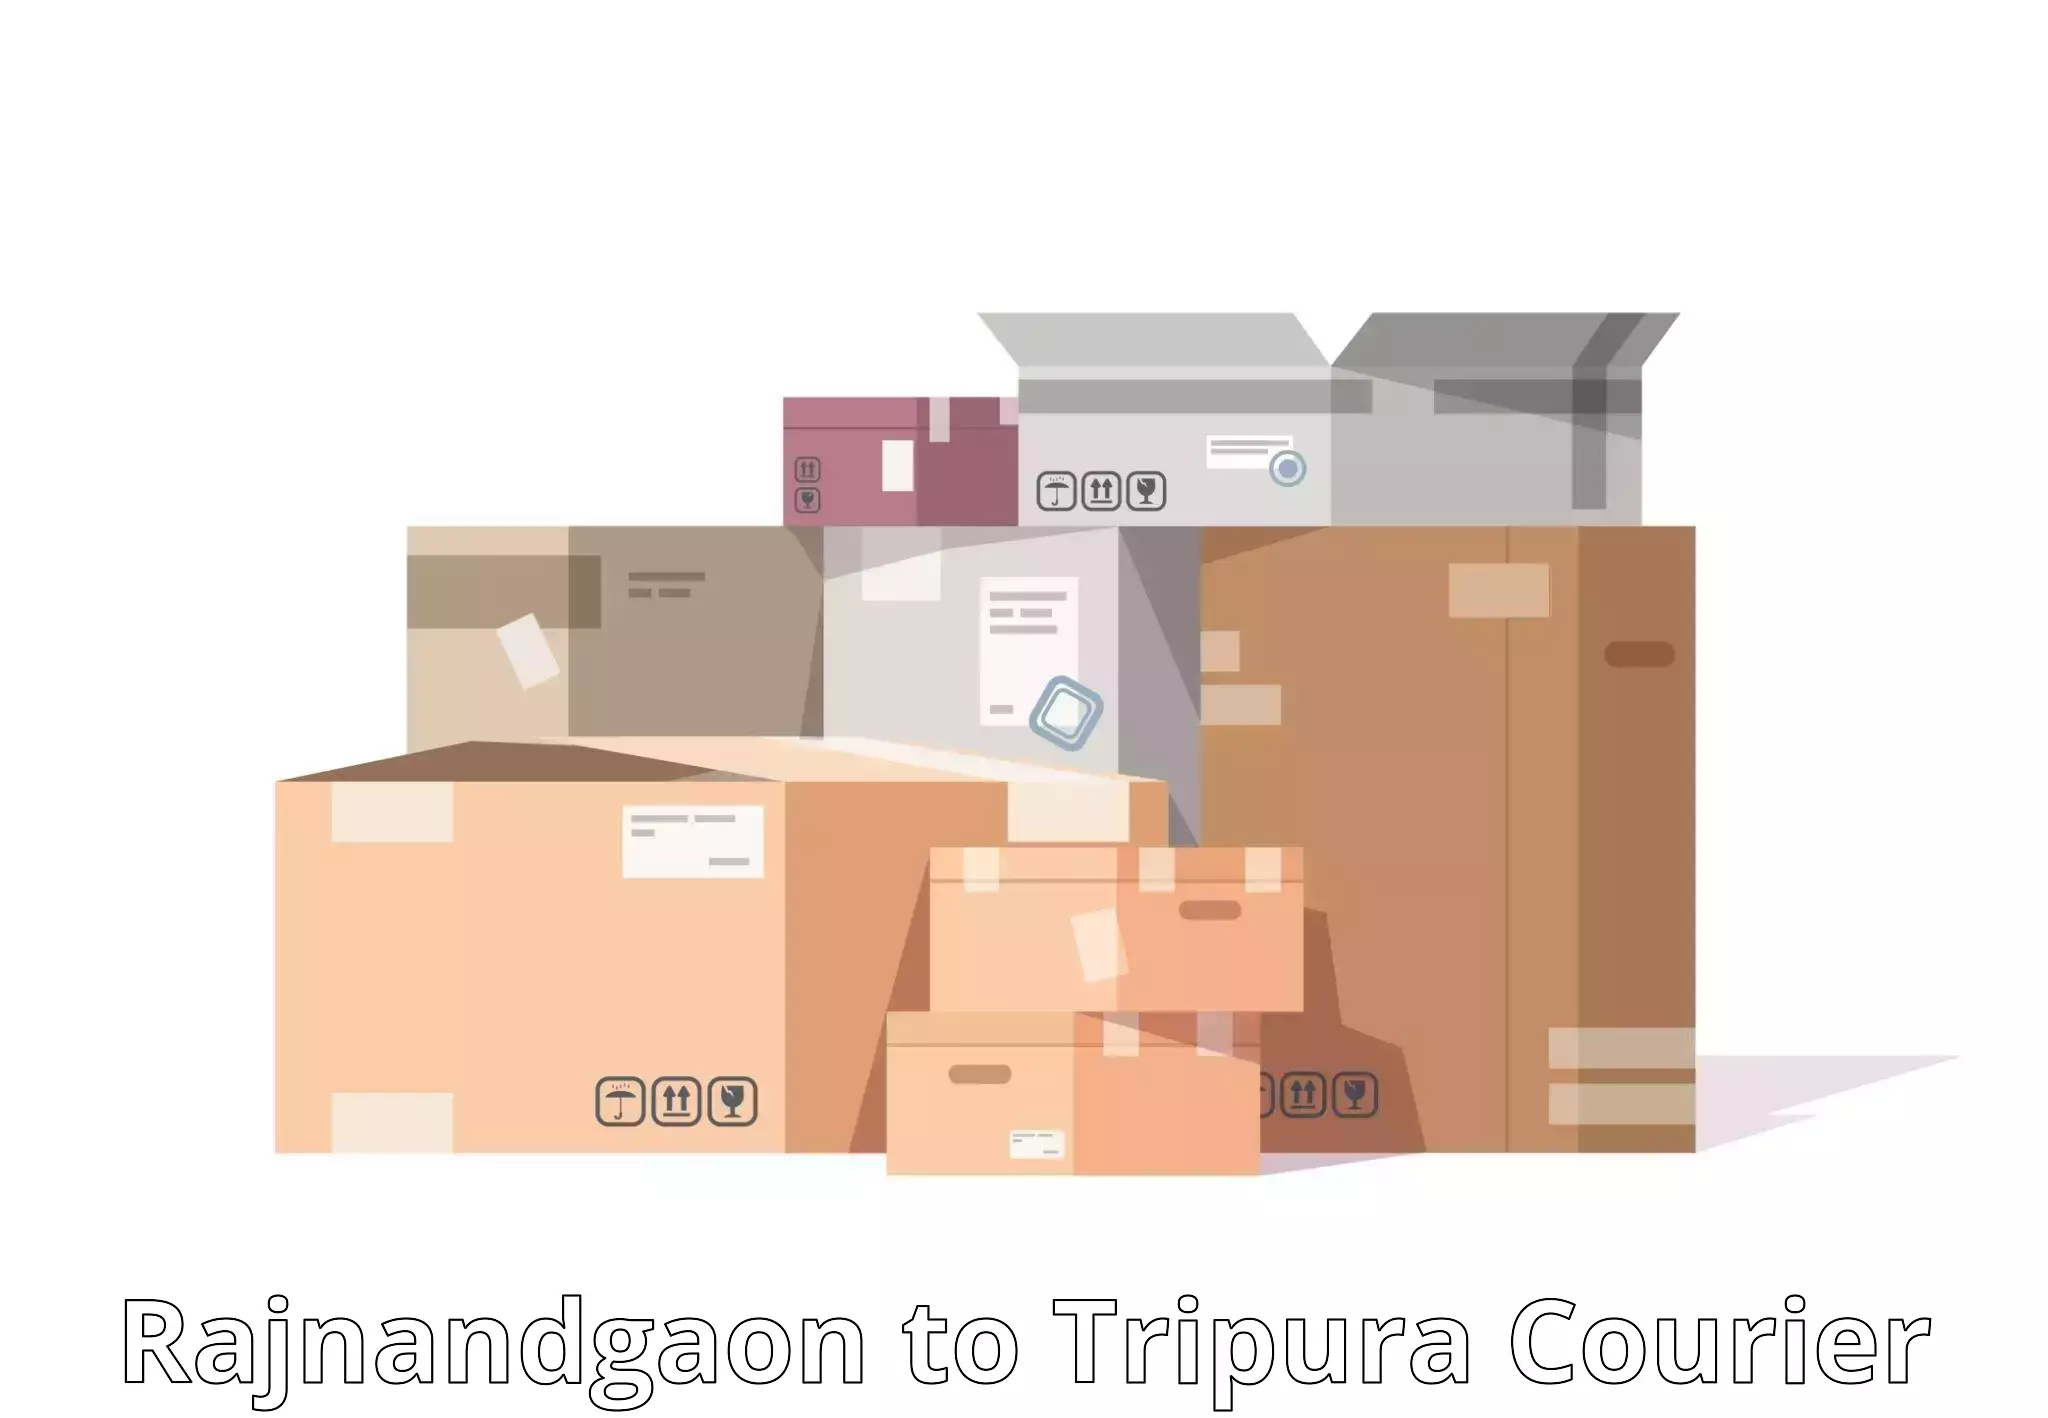 Efficient courier operations in Rajnandgaon to Agartala